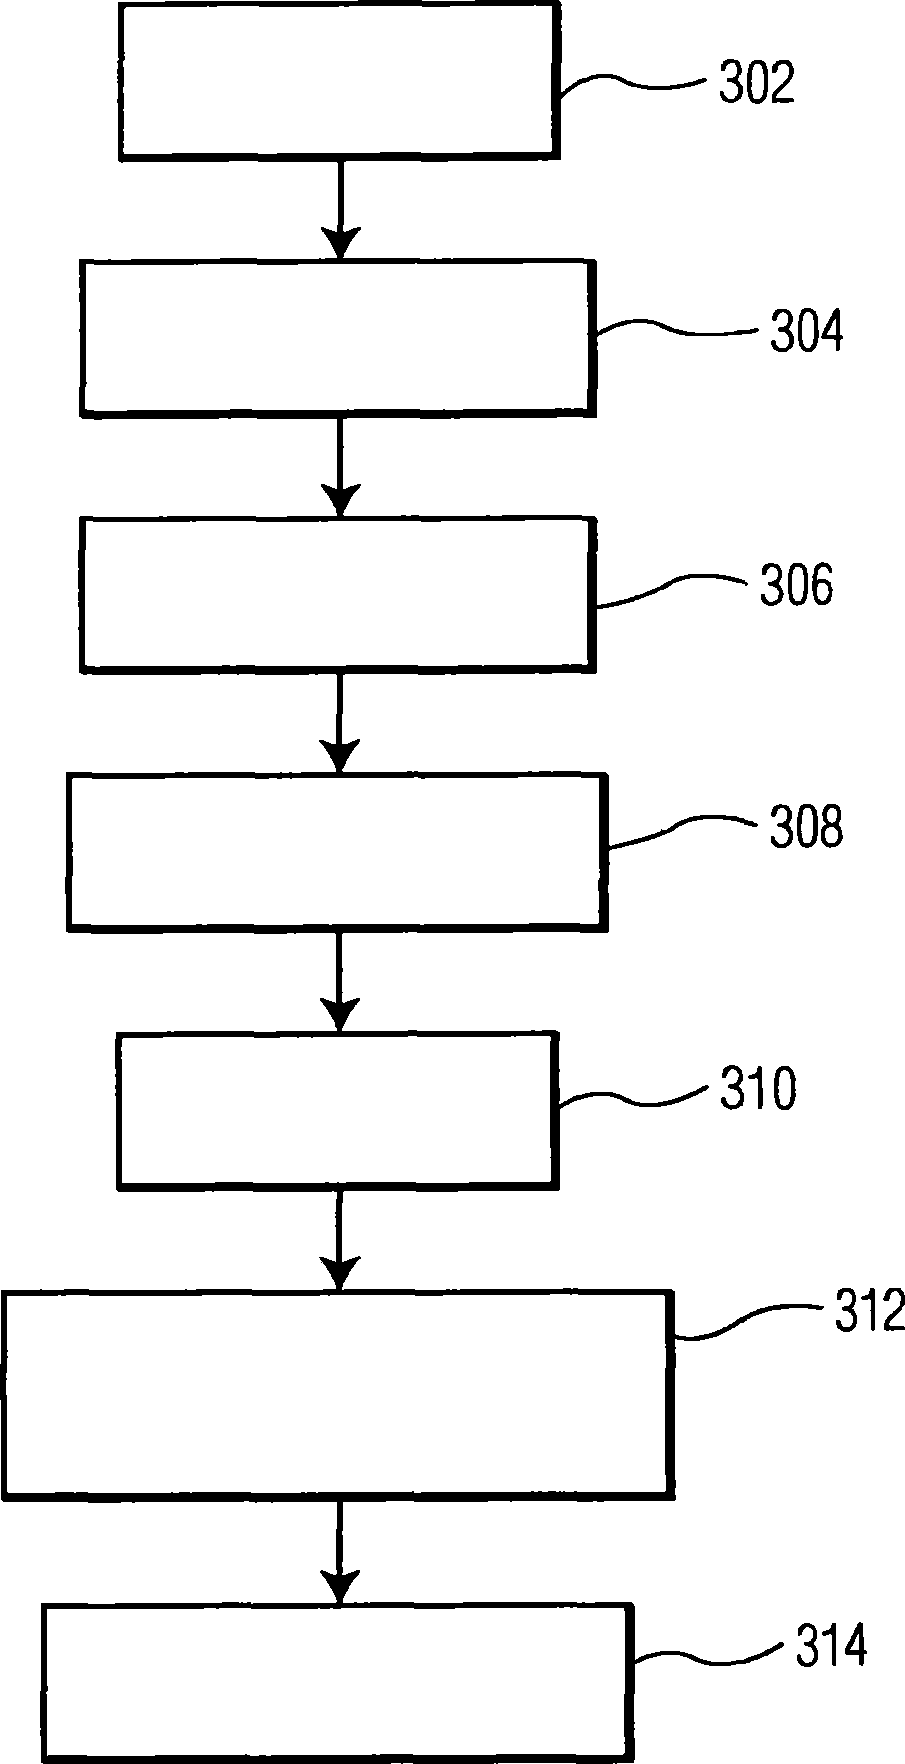 Display and method for medical procedure selection